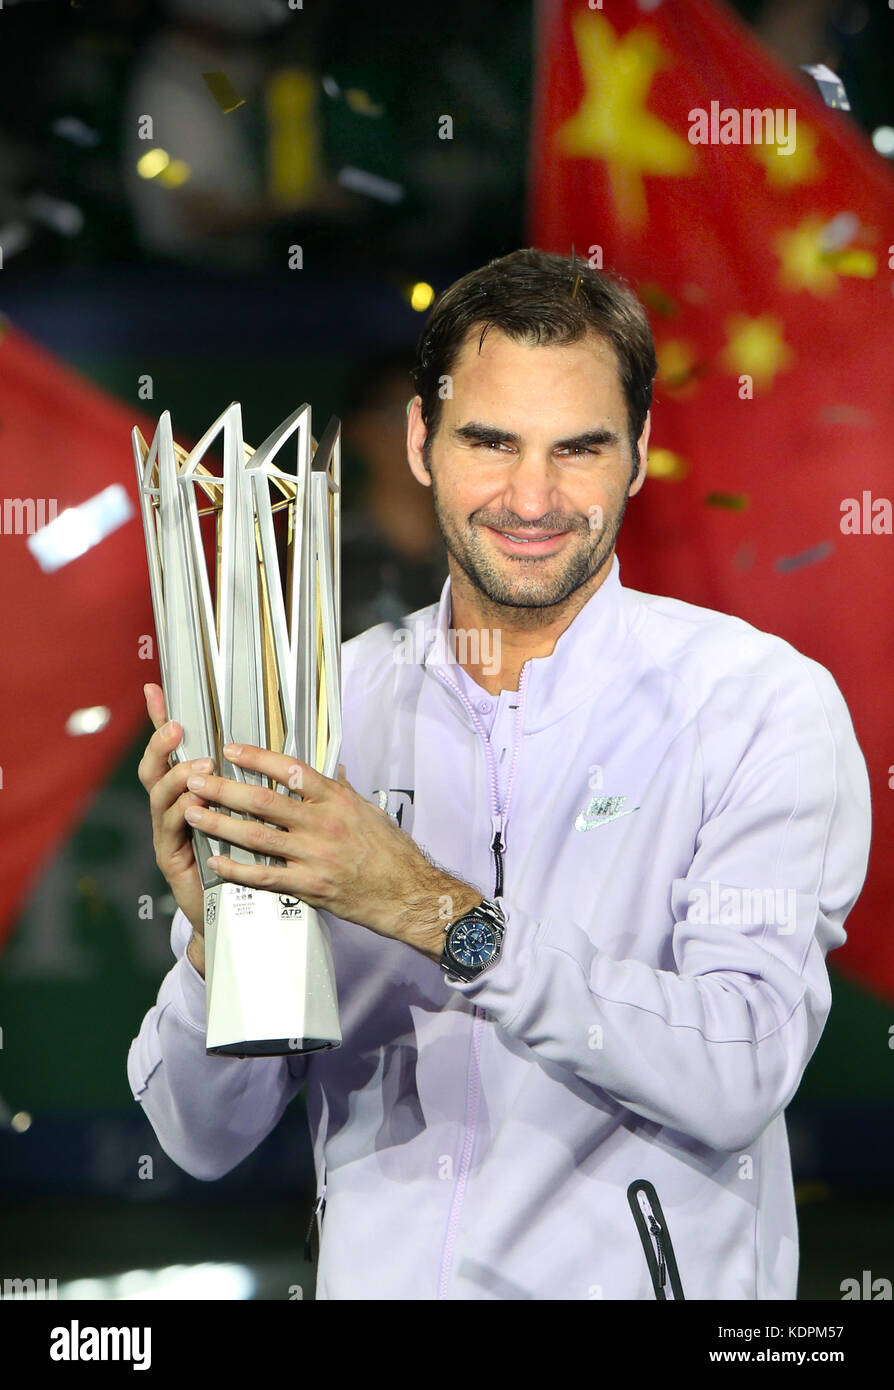 Shanghai, China. 15th Oct, 2017. Roger Federer of Switzerland poses with  the trophy after winning the singles final match against Rafael Nadal of  Spain at 2017 ATP Shanghai Masters tennis tournament in